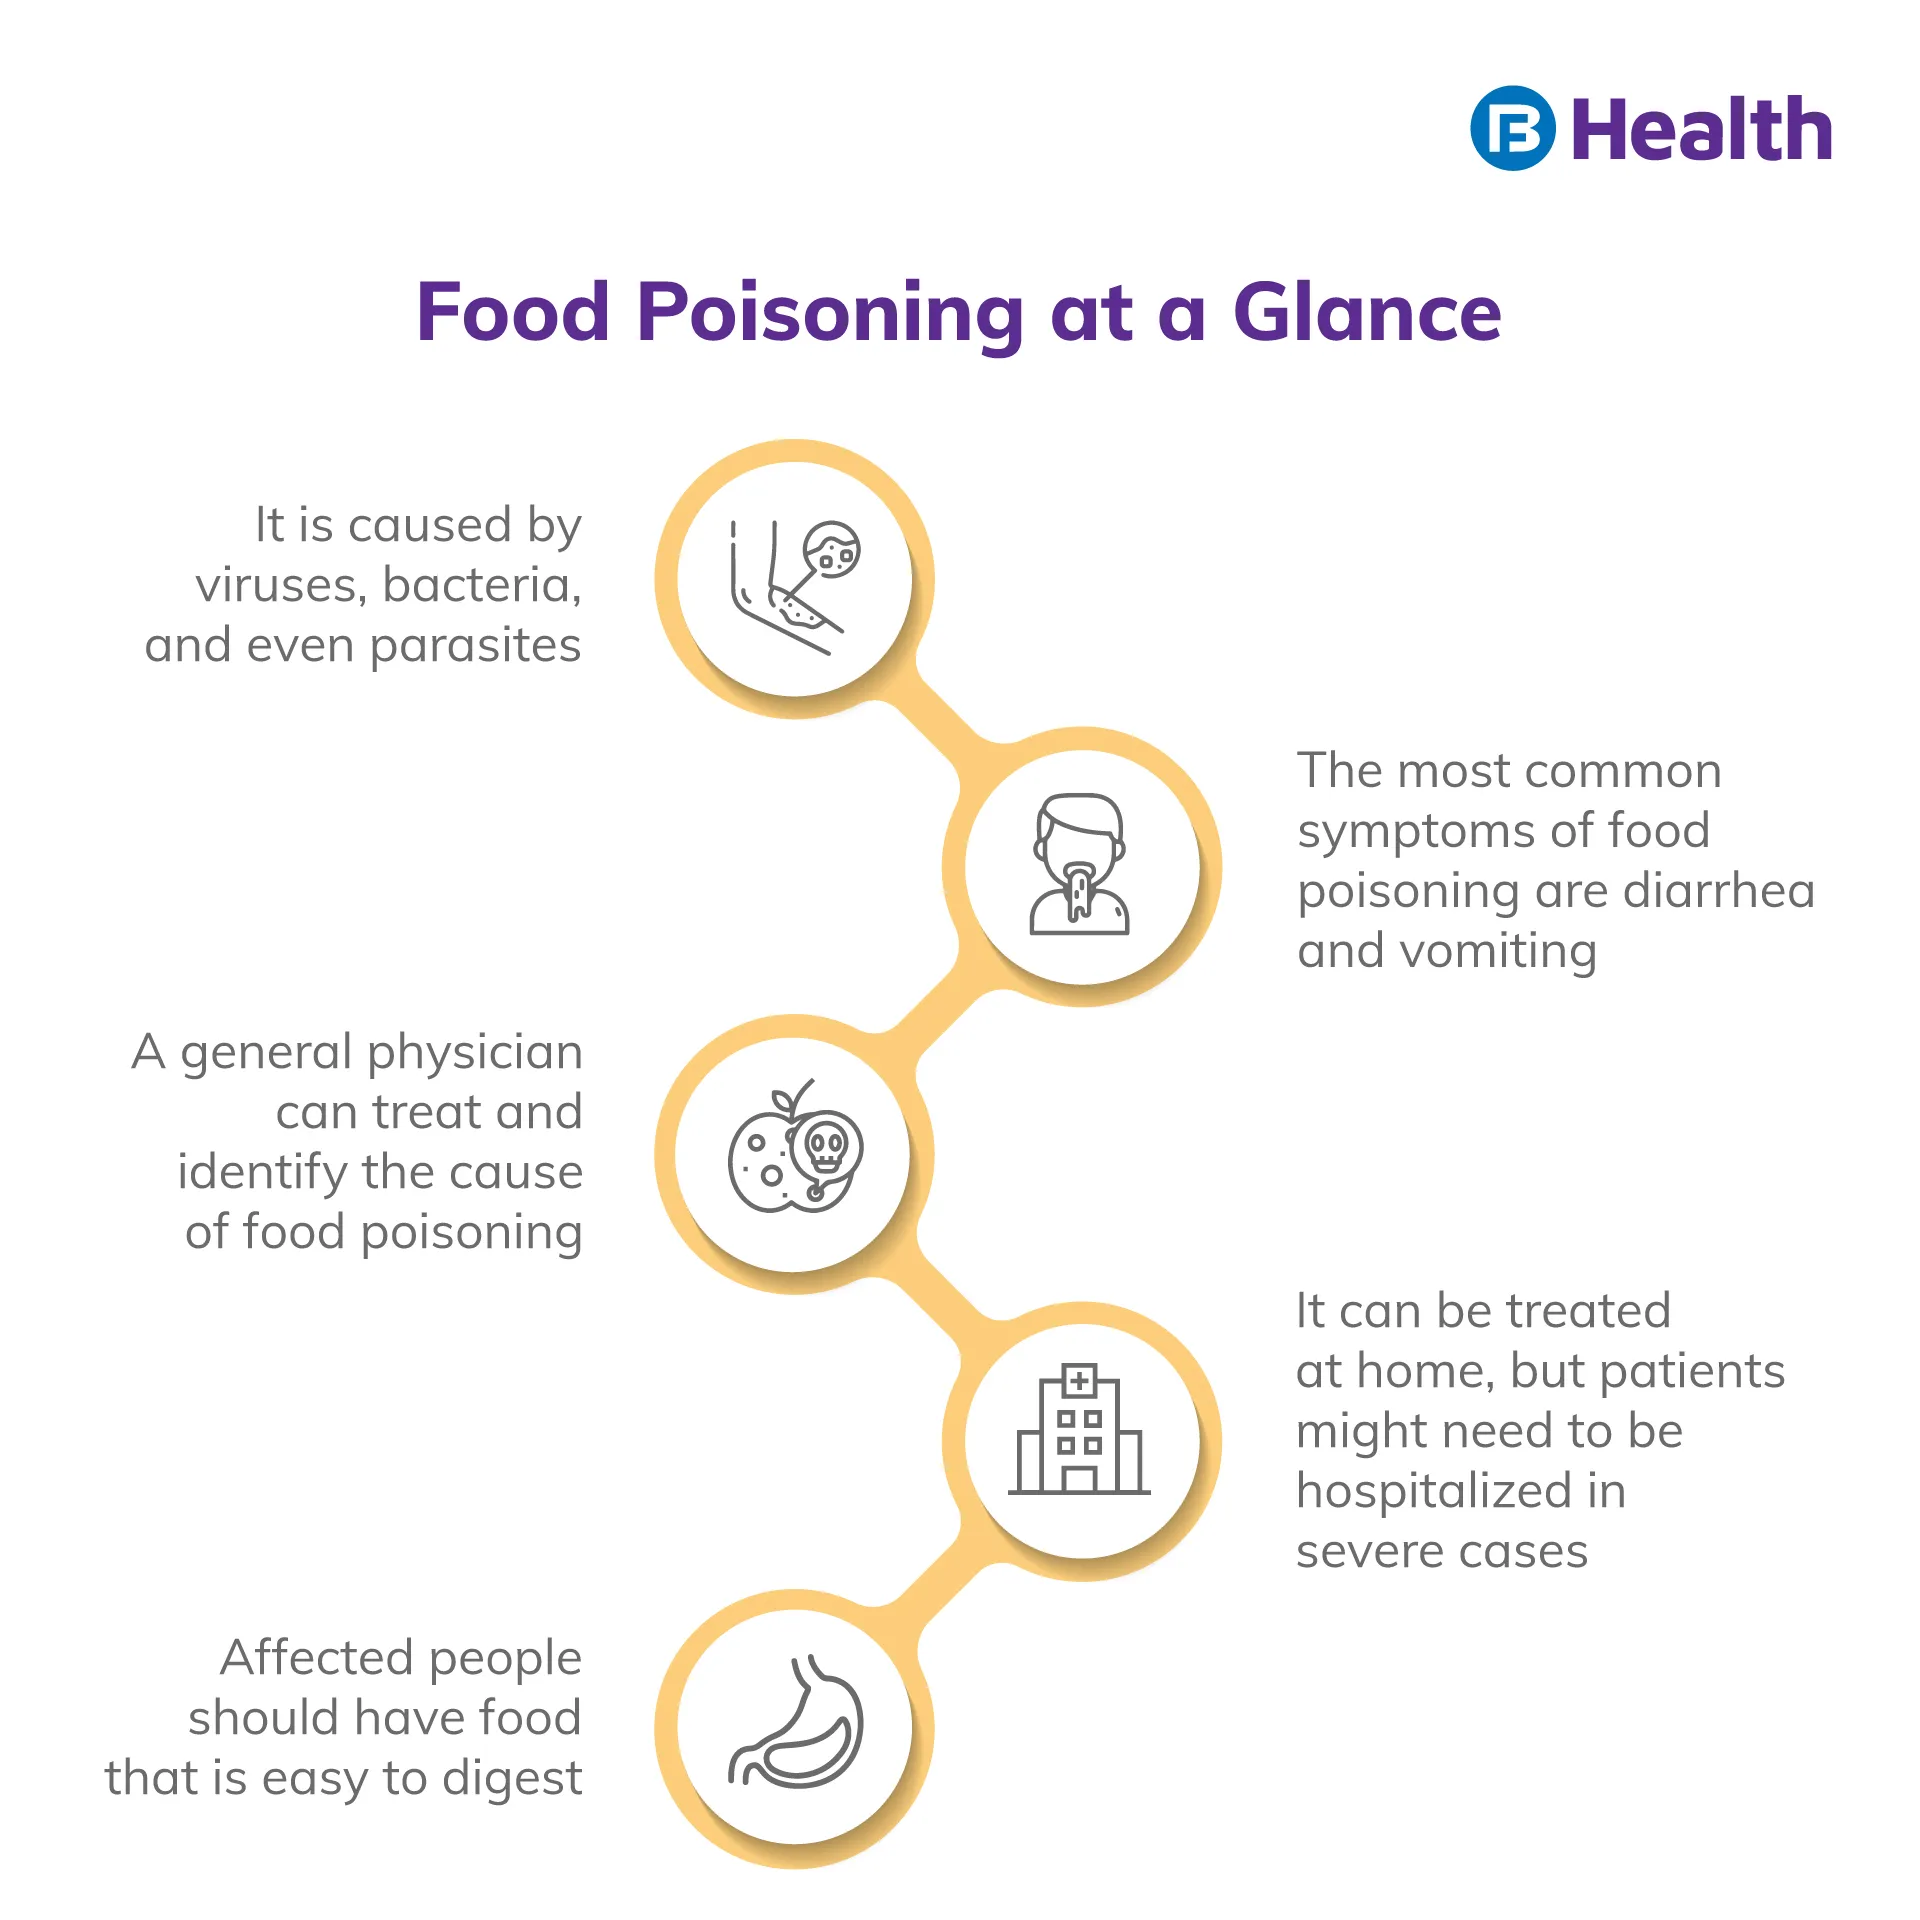 Food Poisoning at glance